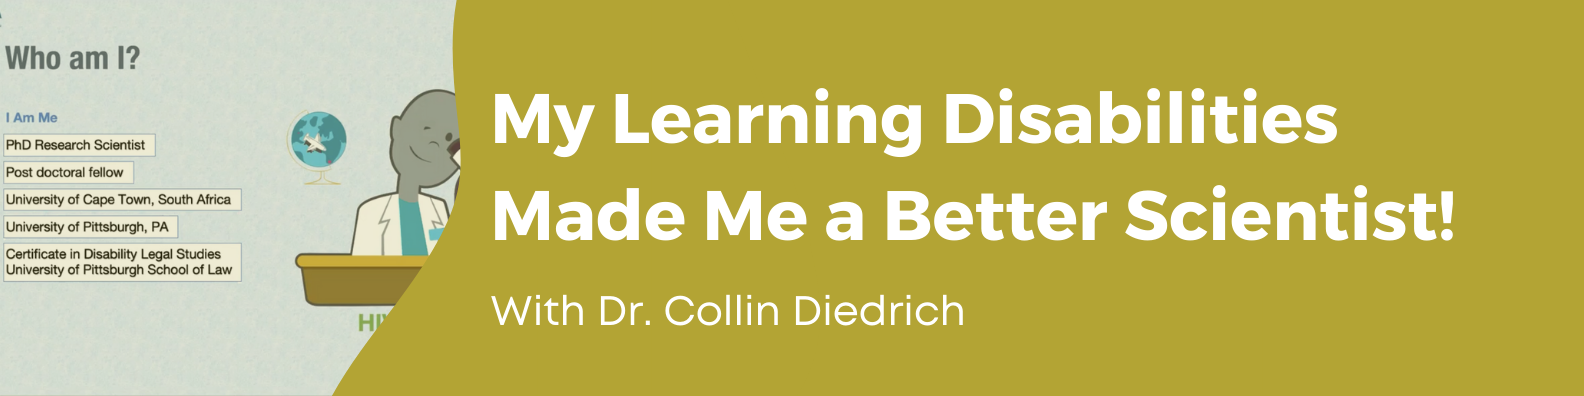 My Learning Disabilities Made Me a Better Scientist! With Dr. Collin Diedrich